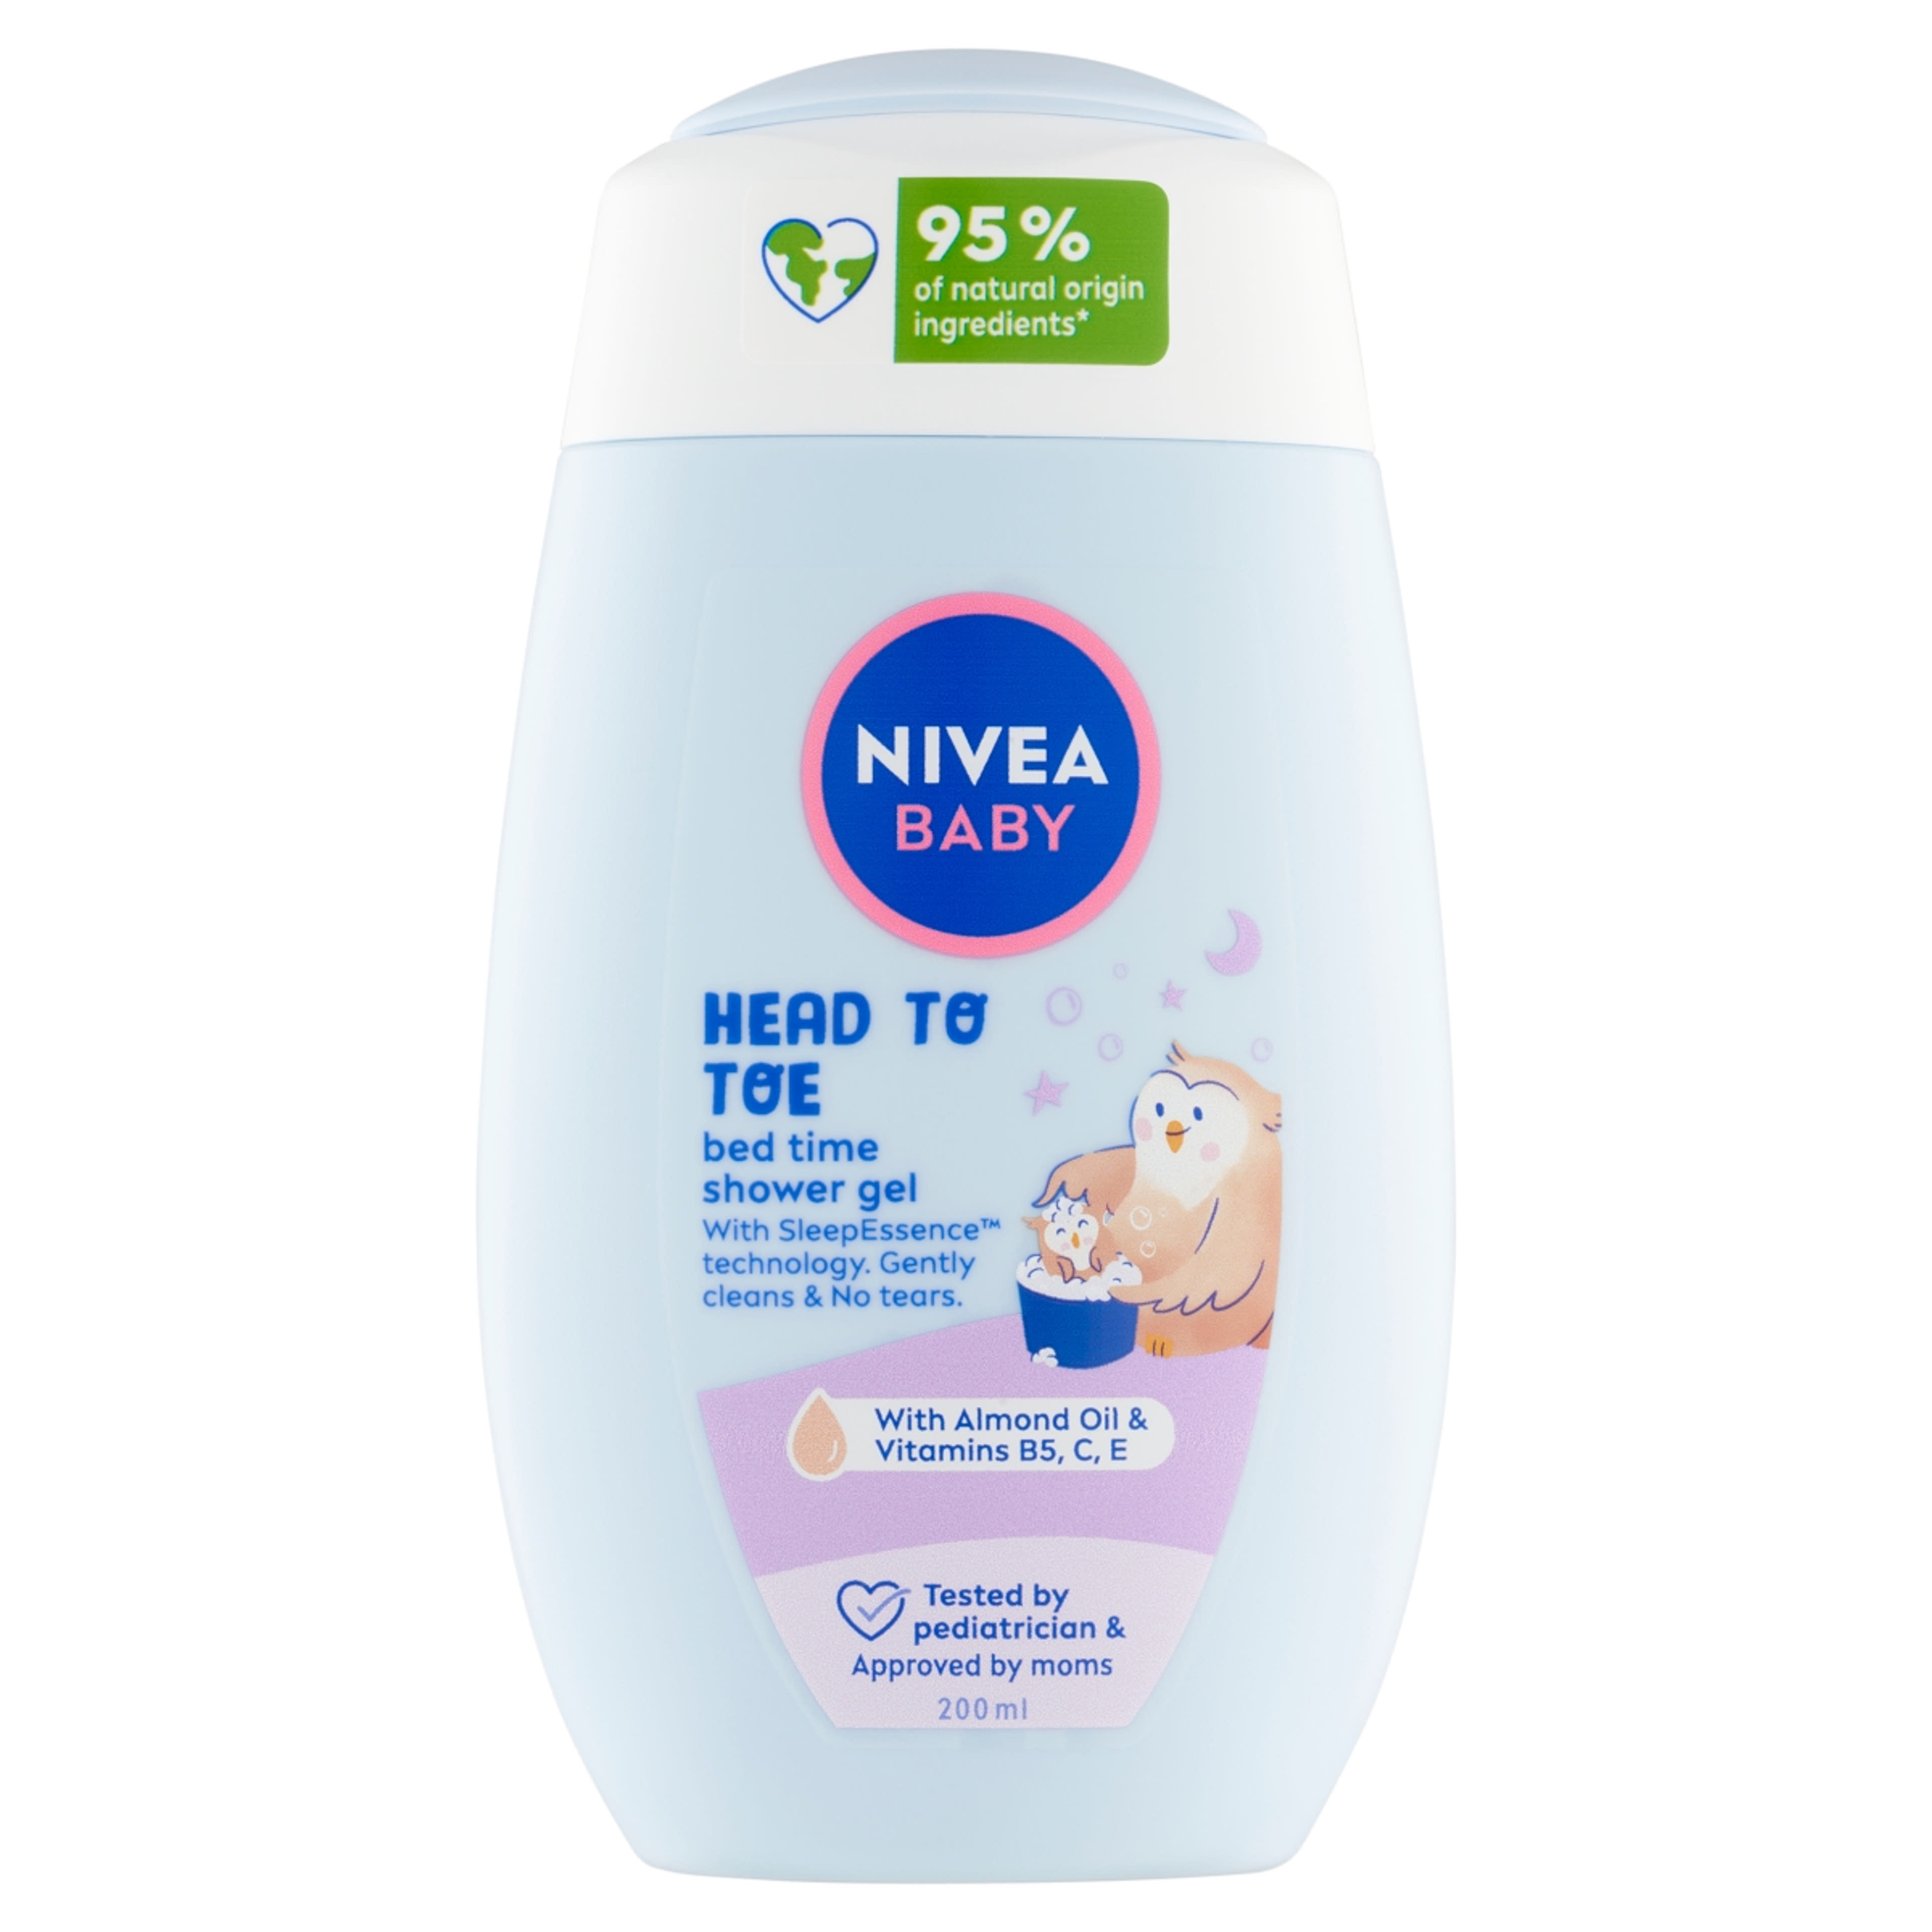 Nivea BABY Bed Time Head to Toe tusfürdő - 200 ml-2